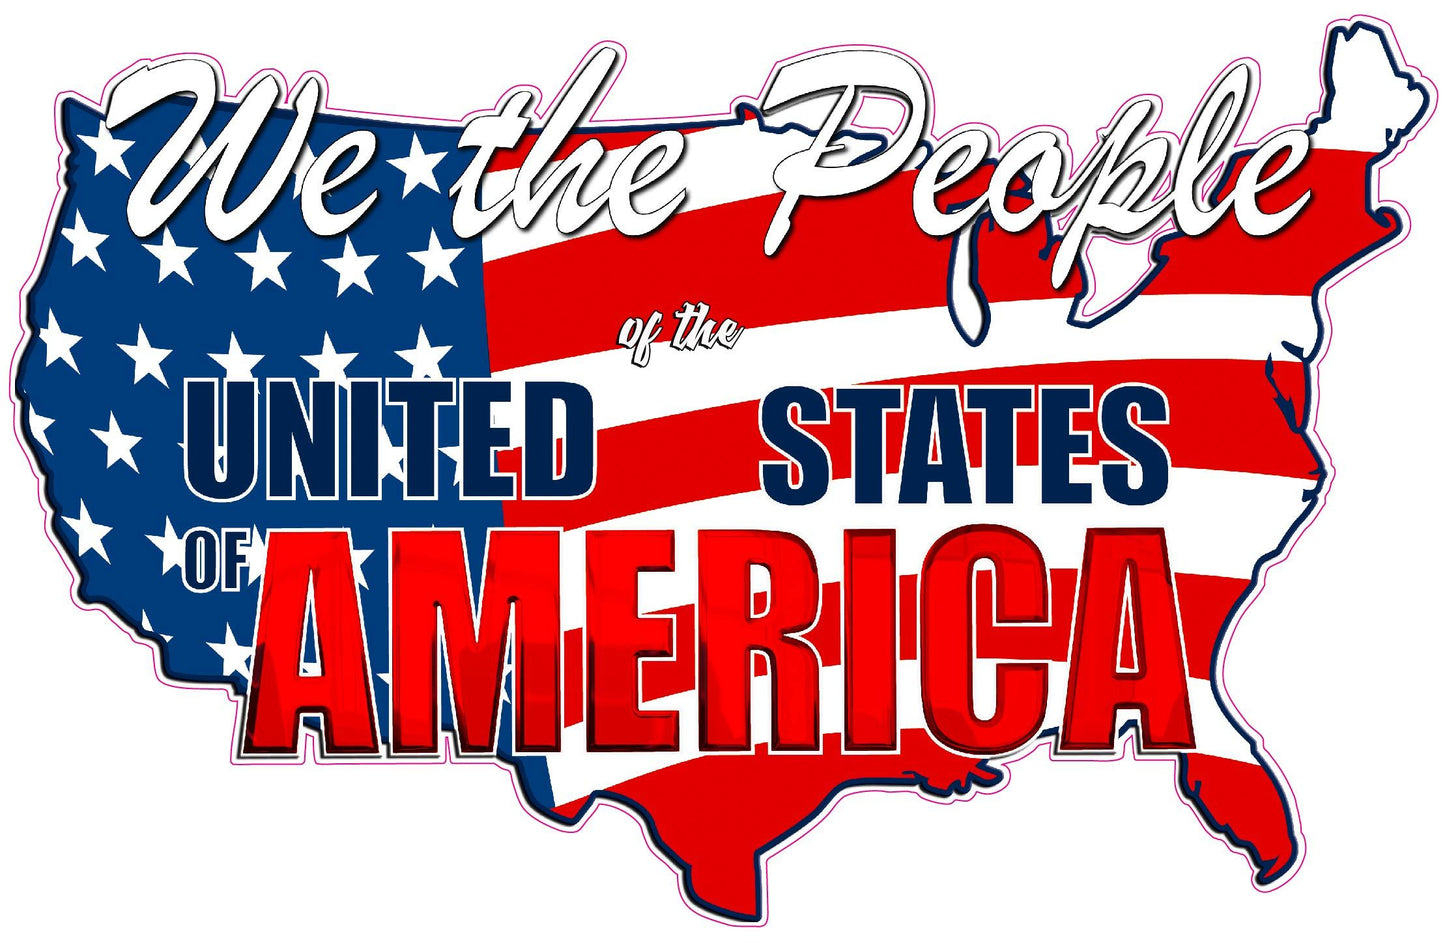 United States of America We the People Decal - American Bald Eagle, American bald eagle decal, American eagle, American Eagle American Flag Decal, American flag, American flag decals, American flag eagle decals, American flag stickers, automotive decals, automotive stickers, decals, eagle decals, eagle stickers, God Bless America Decal, God Bless America Sticker, i stand for the flag, Military decals, one nation under god, Patriotic stickers, United States decal, United States Flag Decal, United